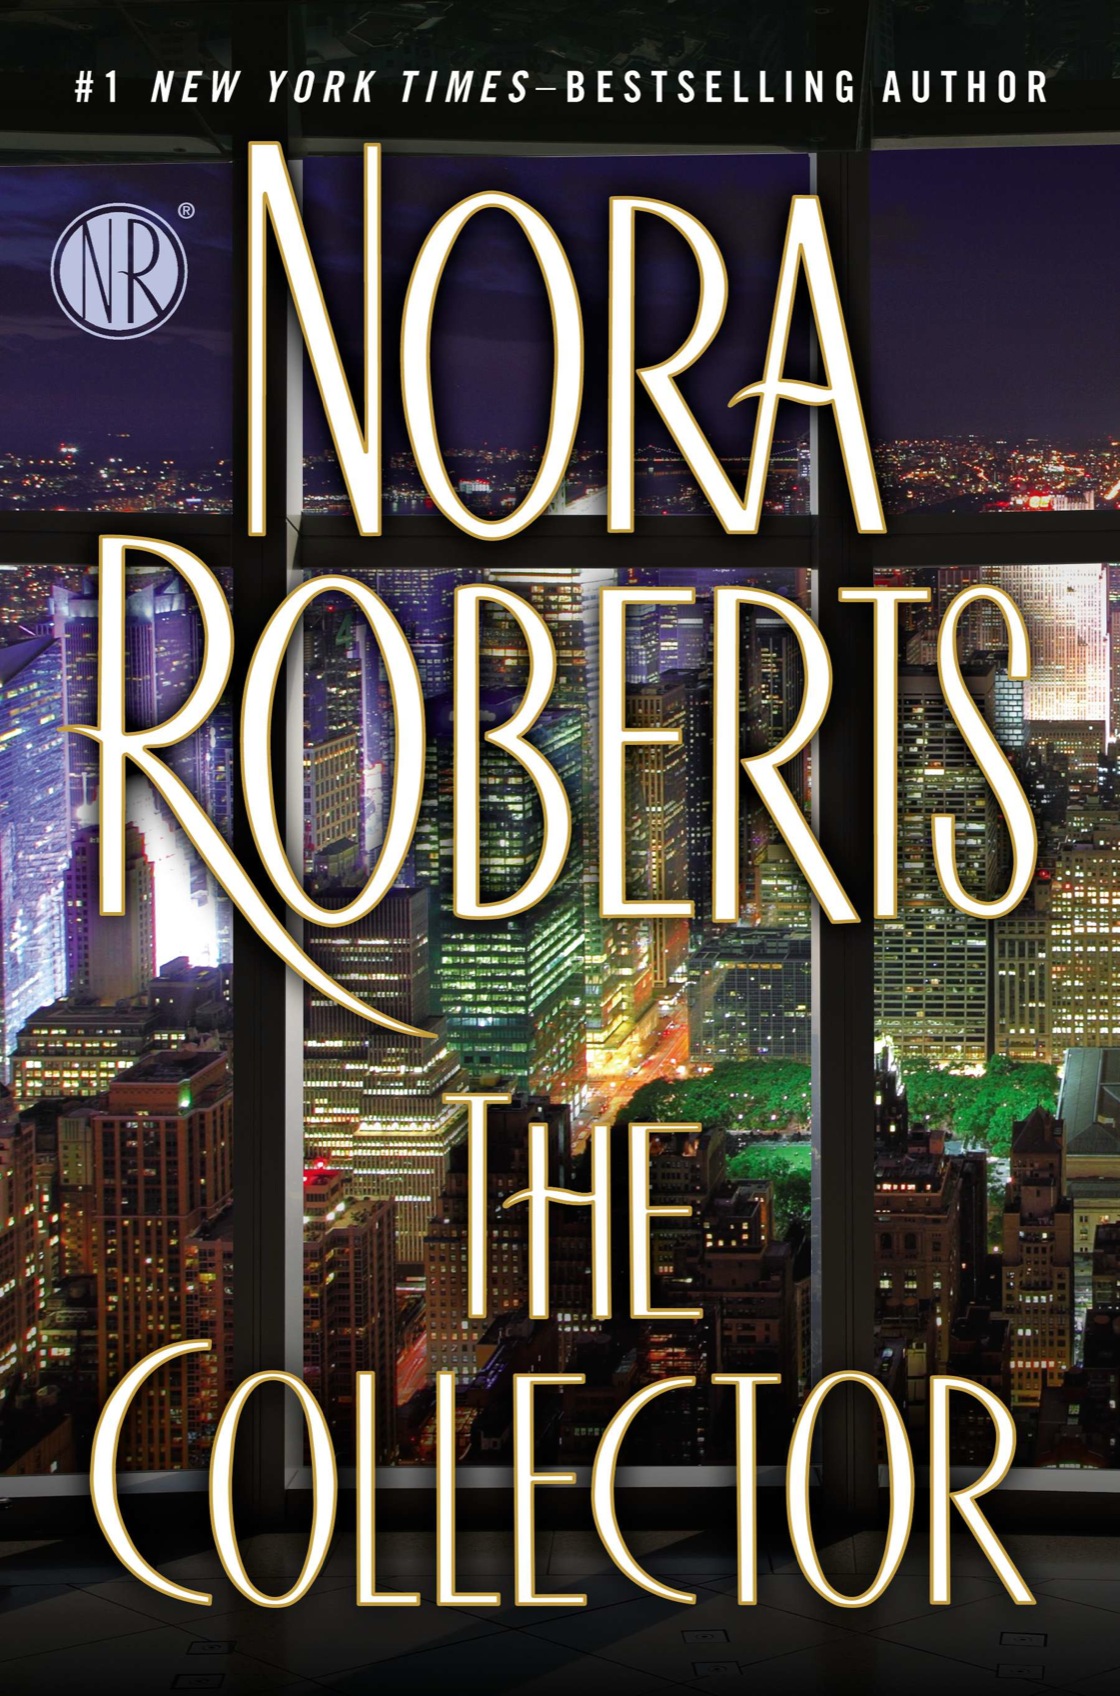 The Collector (2014) by Nora Roberts